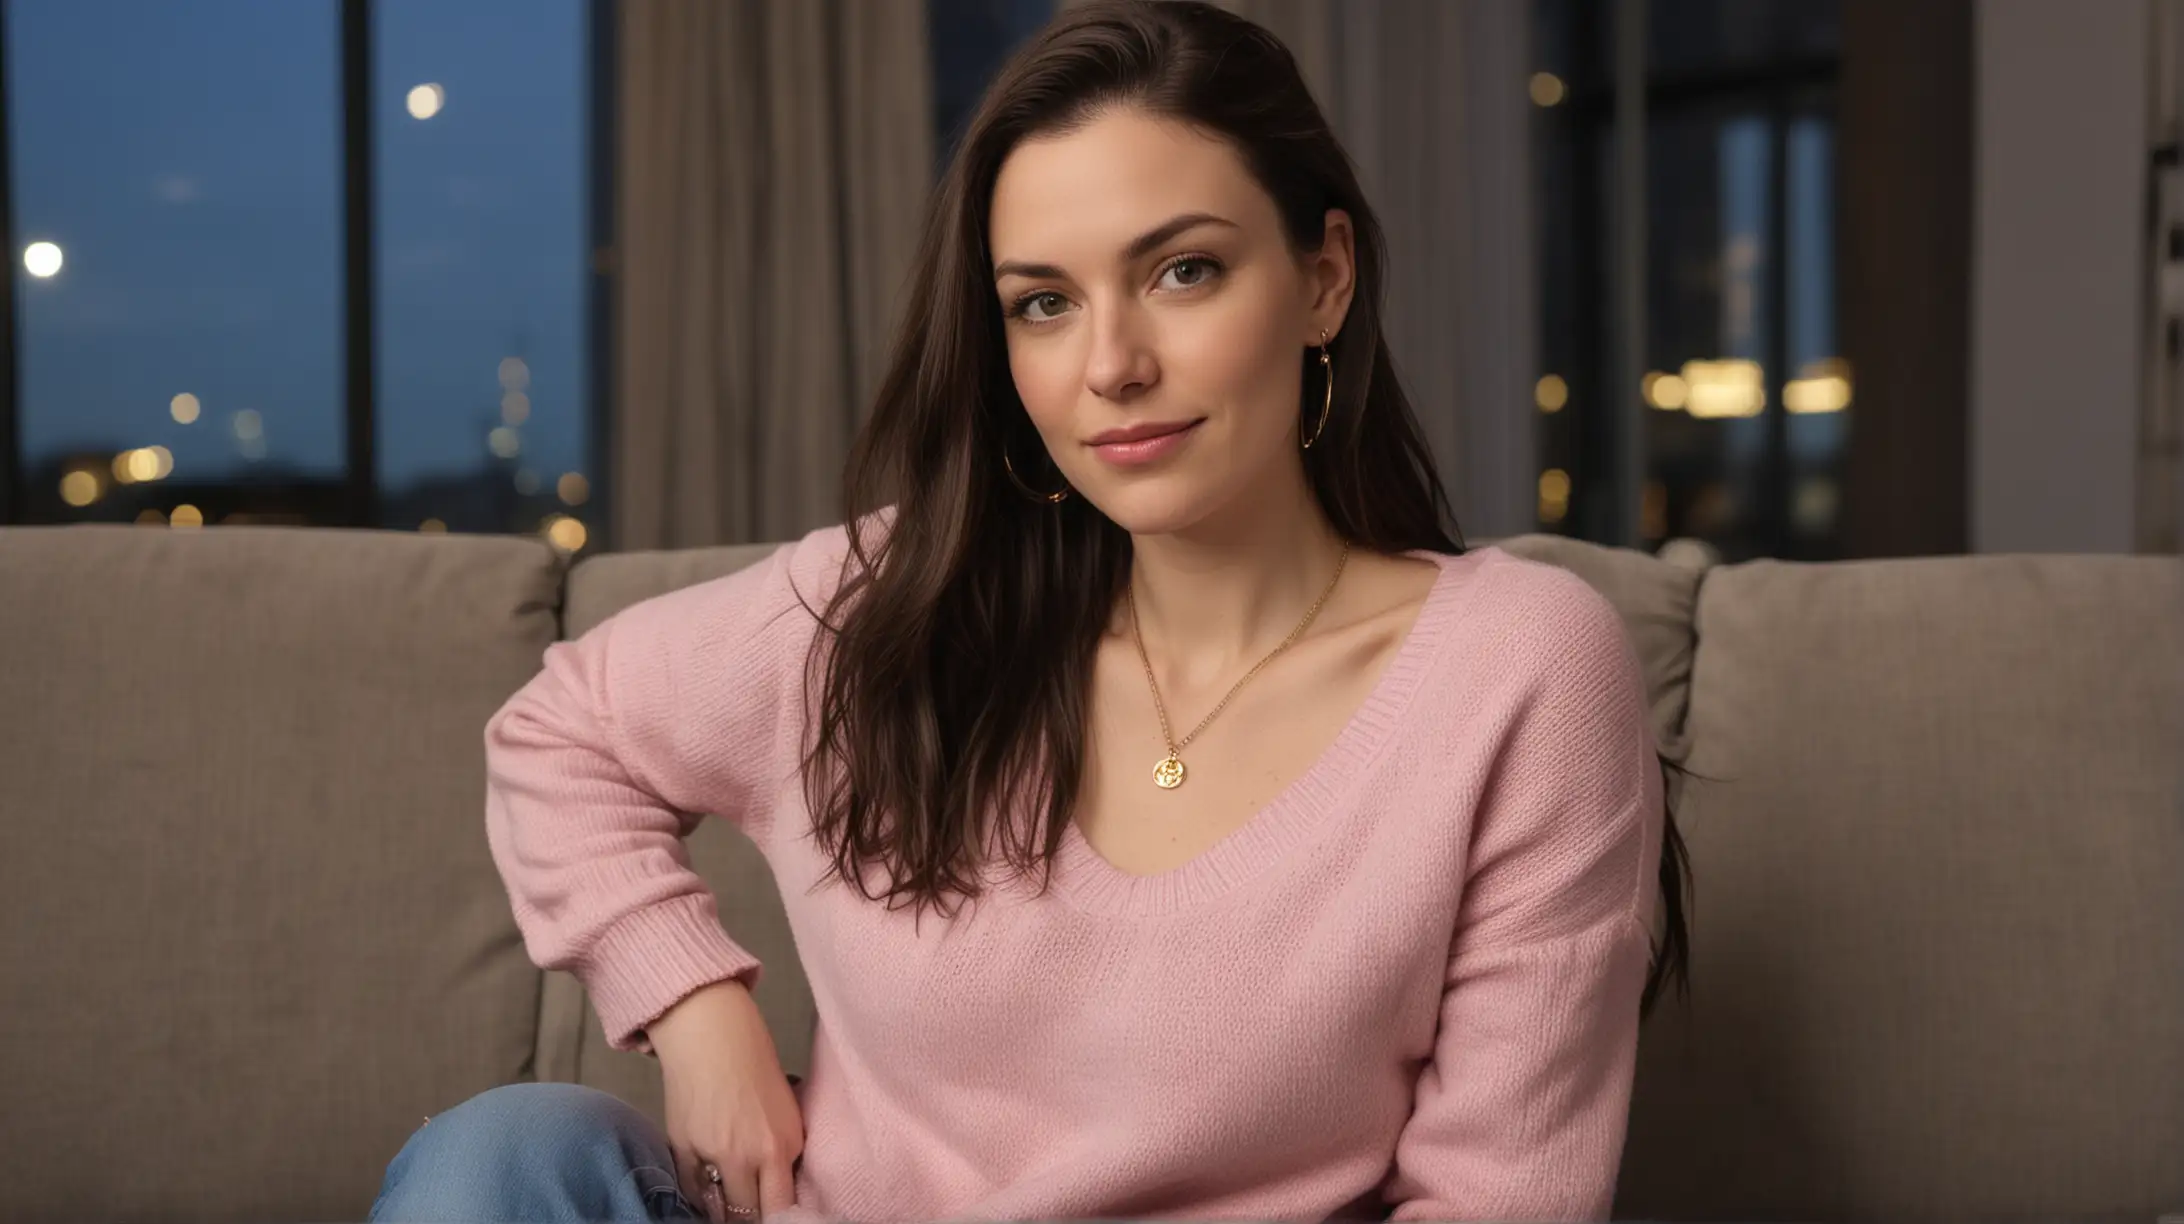 Closeup of 30 year old pale white woman with long dark brown hair parted to the right, gold necklace, pink sweater and blue jeans, no smile, relaxing on a gray couch, modern high rise urban apartment background late at night